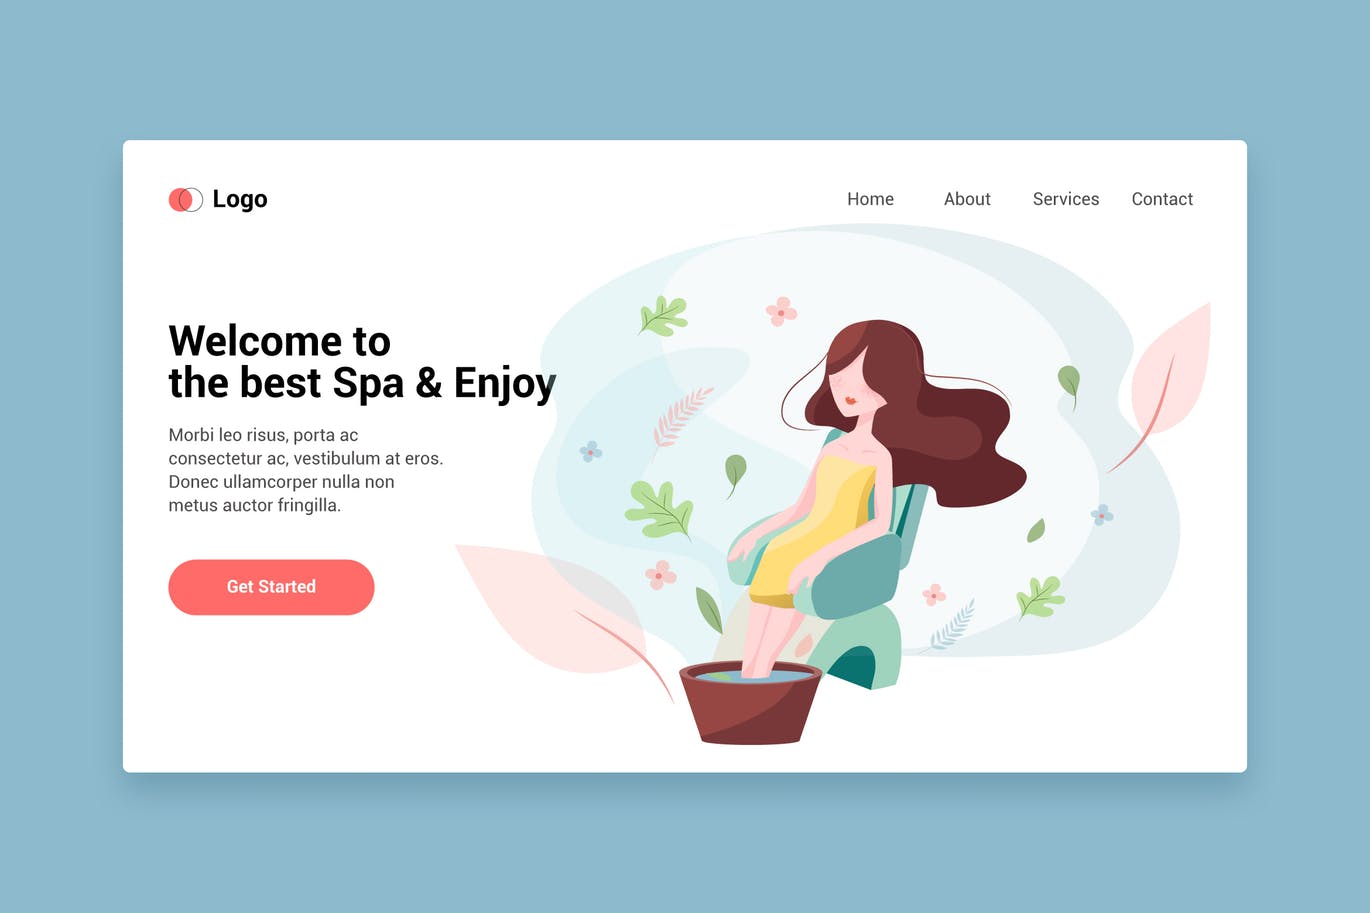 SPA美容主题矢量插画网站着陆页设计模板v12 Spa flat web template for Landing page插图